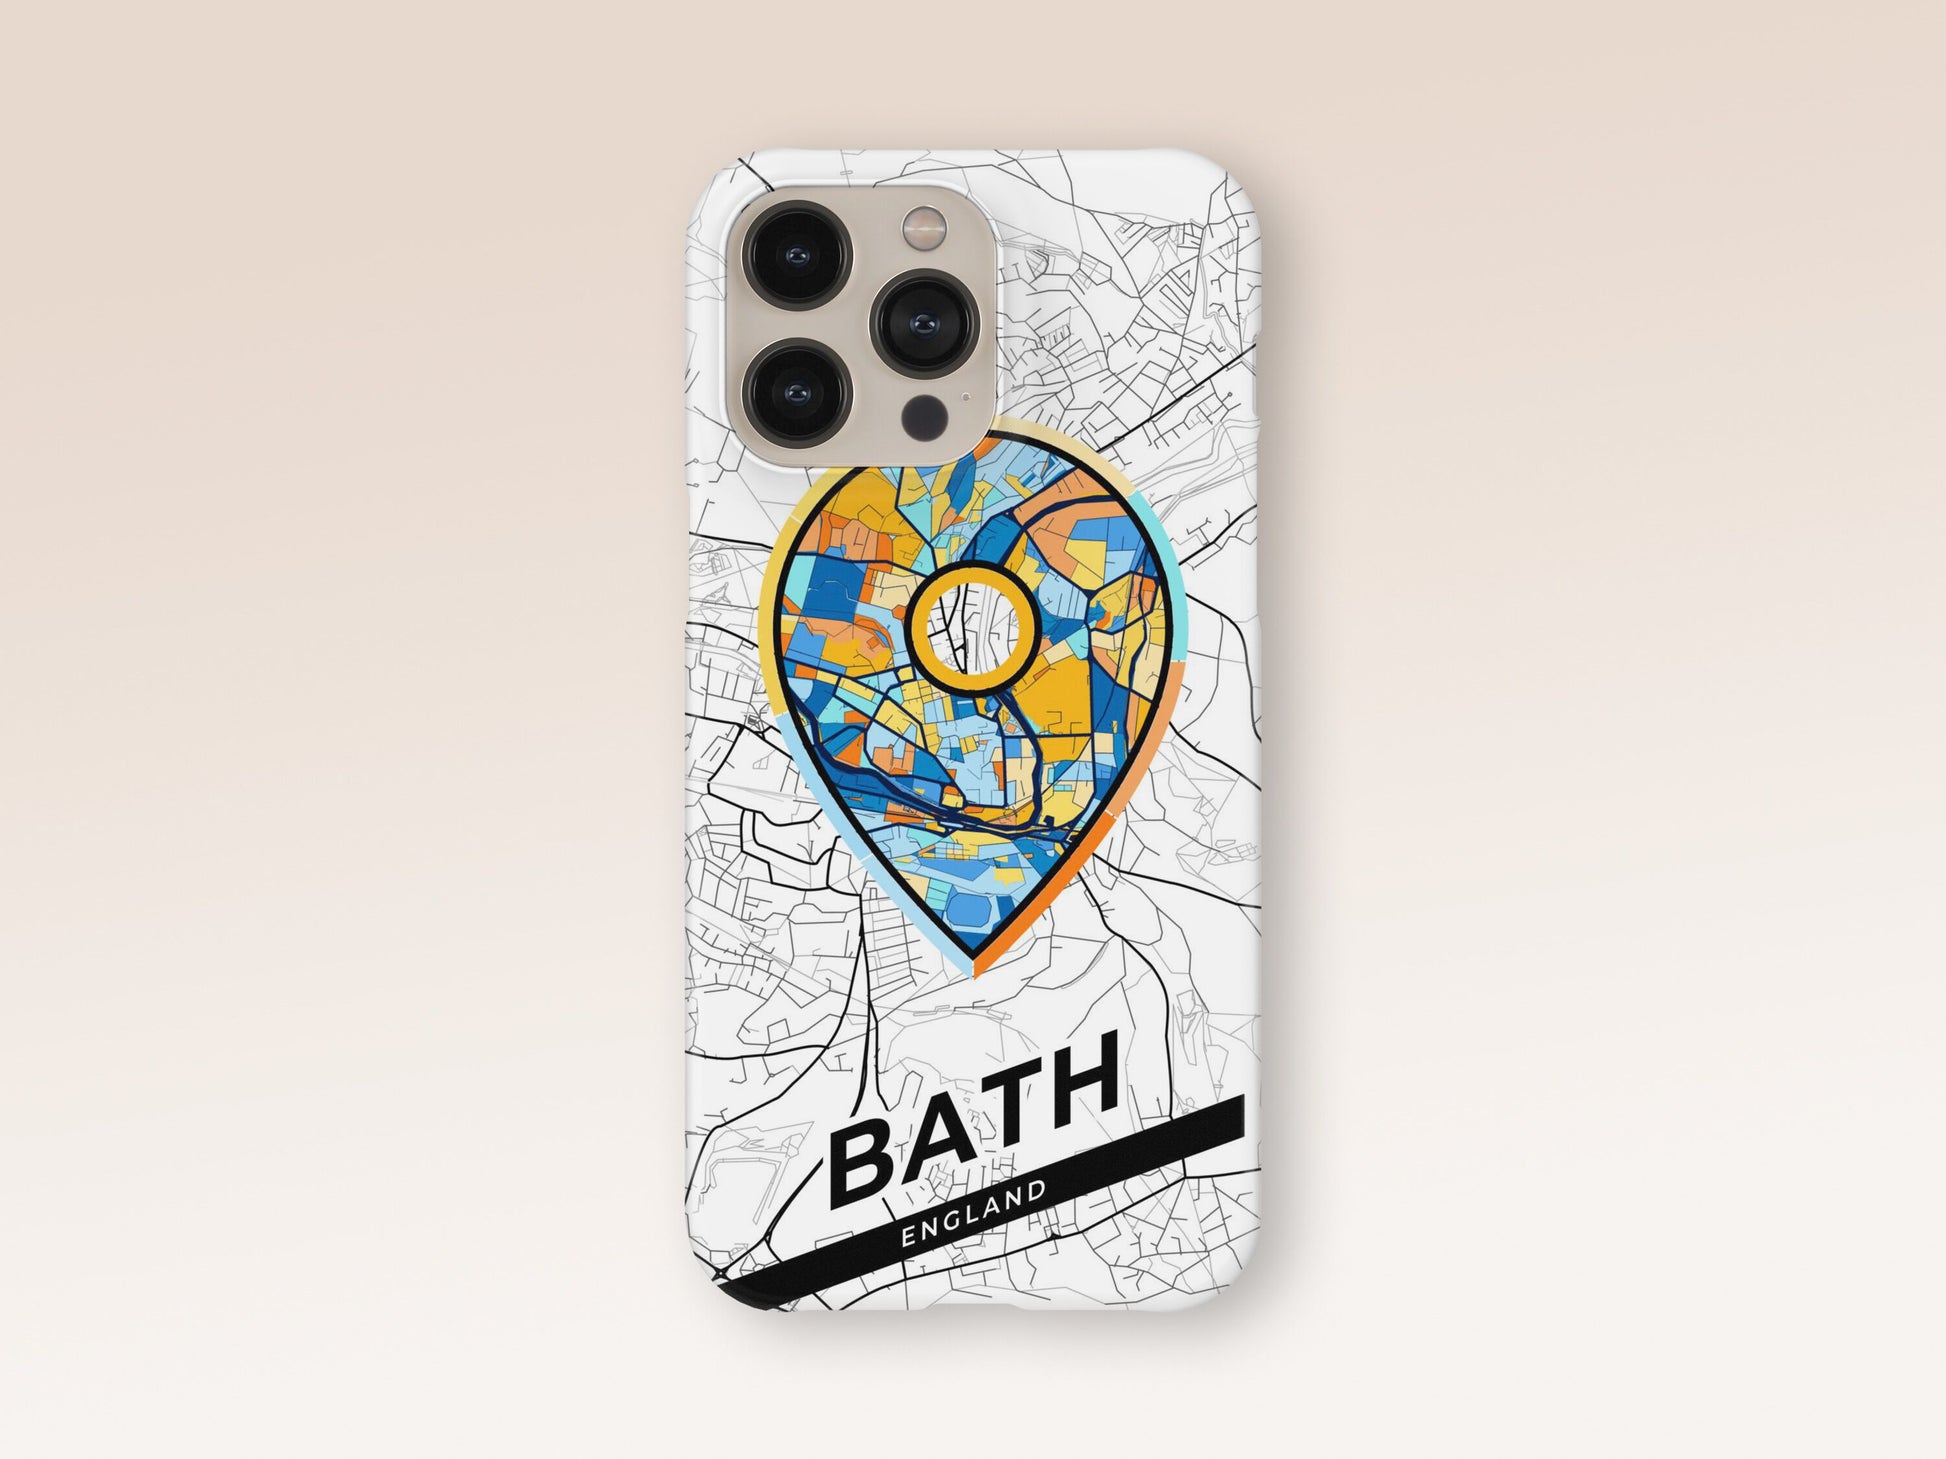 Bath England slim phone case with colorful icon. Birthday, wedding or housewarming gift. Couple match cases. 1